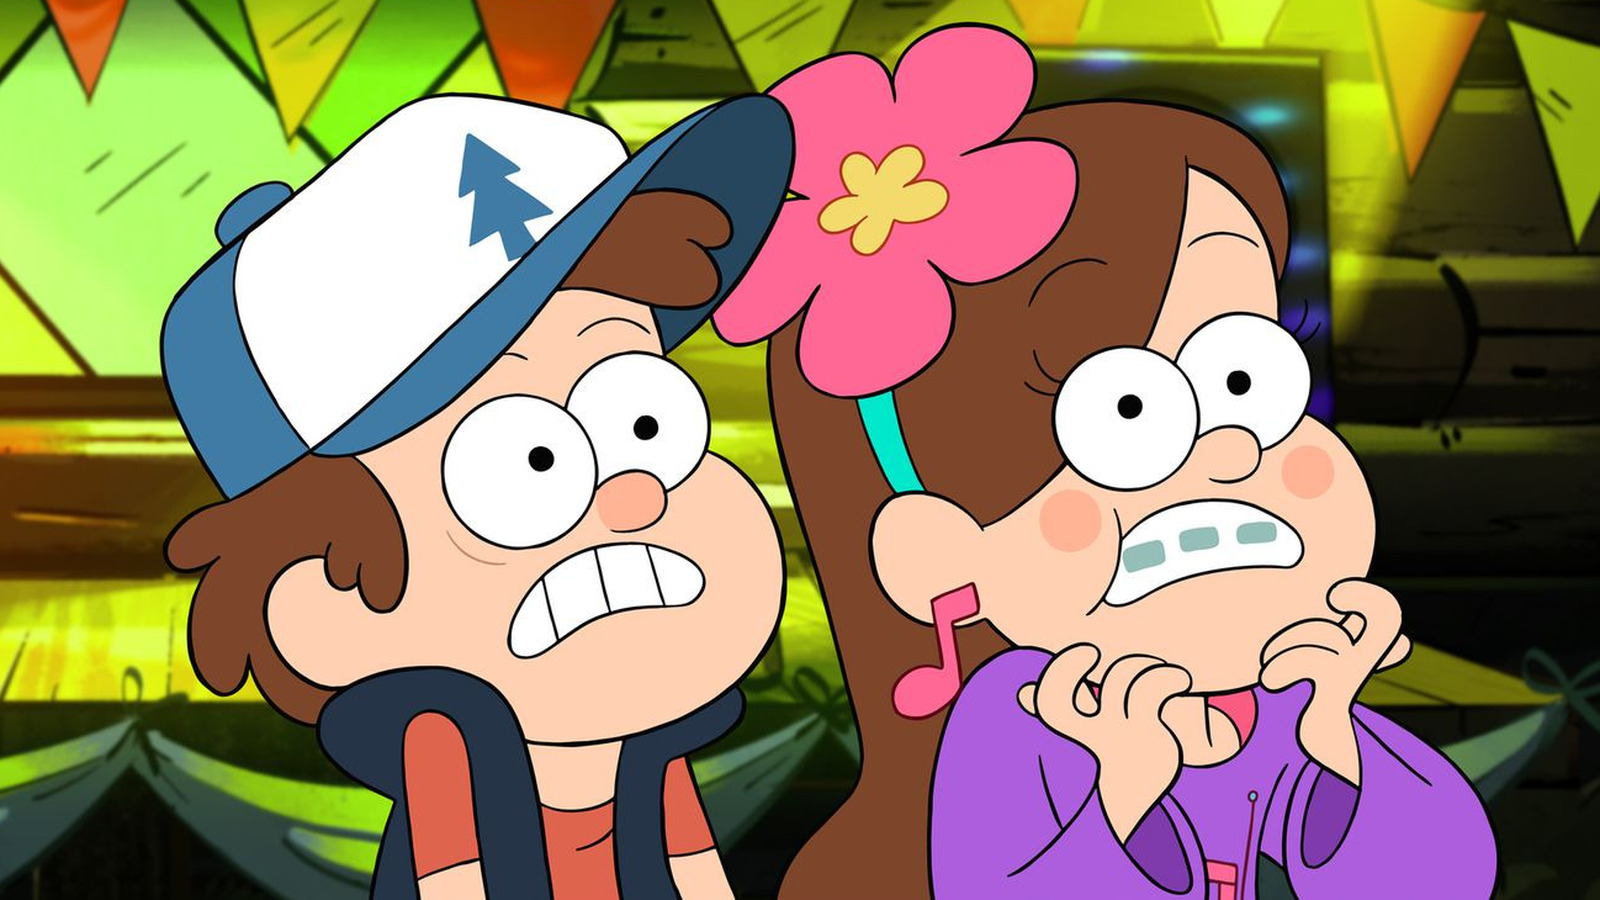 Gravity Falls creator shares Disney's wild revision requests